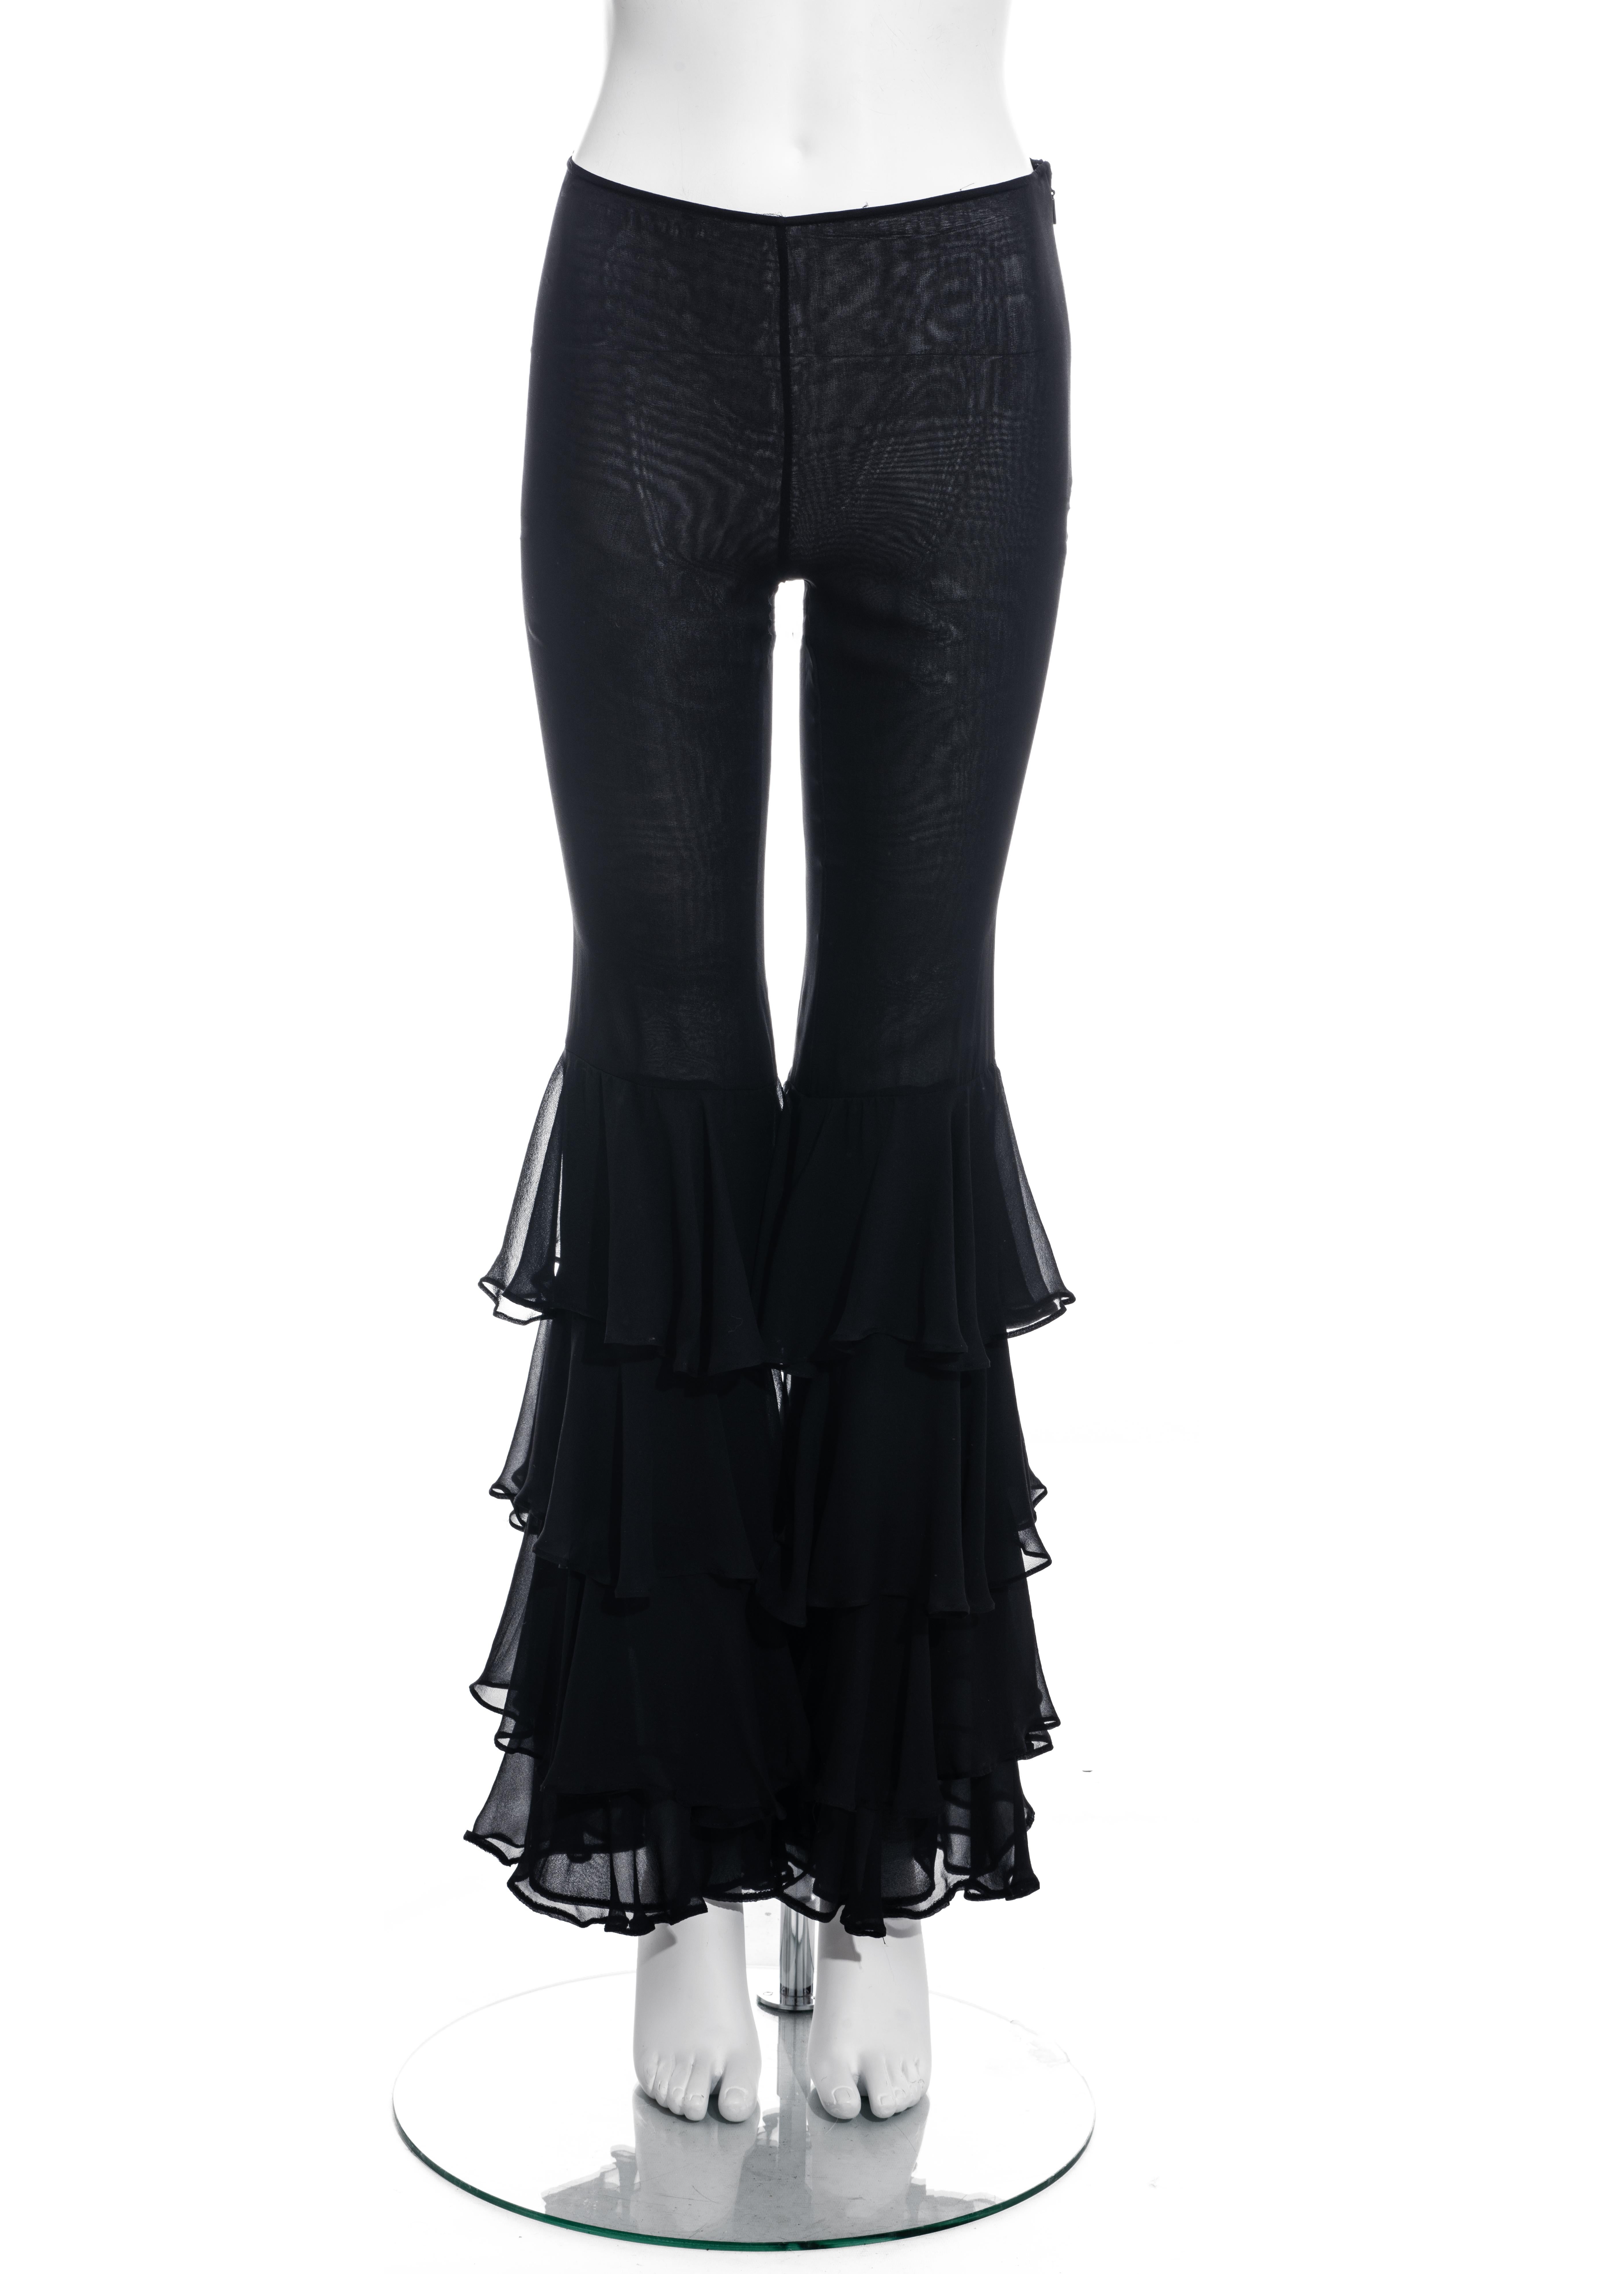 ▪ Gucci black chiffon flared evening pants
▪ Designed by Tom Ford
▪ Ruffled bell bottoms 
▪ Zip fastening
▪ IT 40 - FR 36 - UK 8 - US 4
▪ Fall-Winter 1999